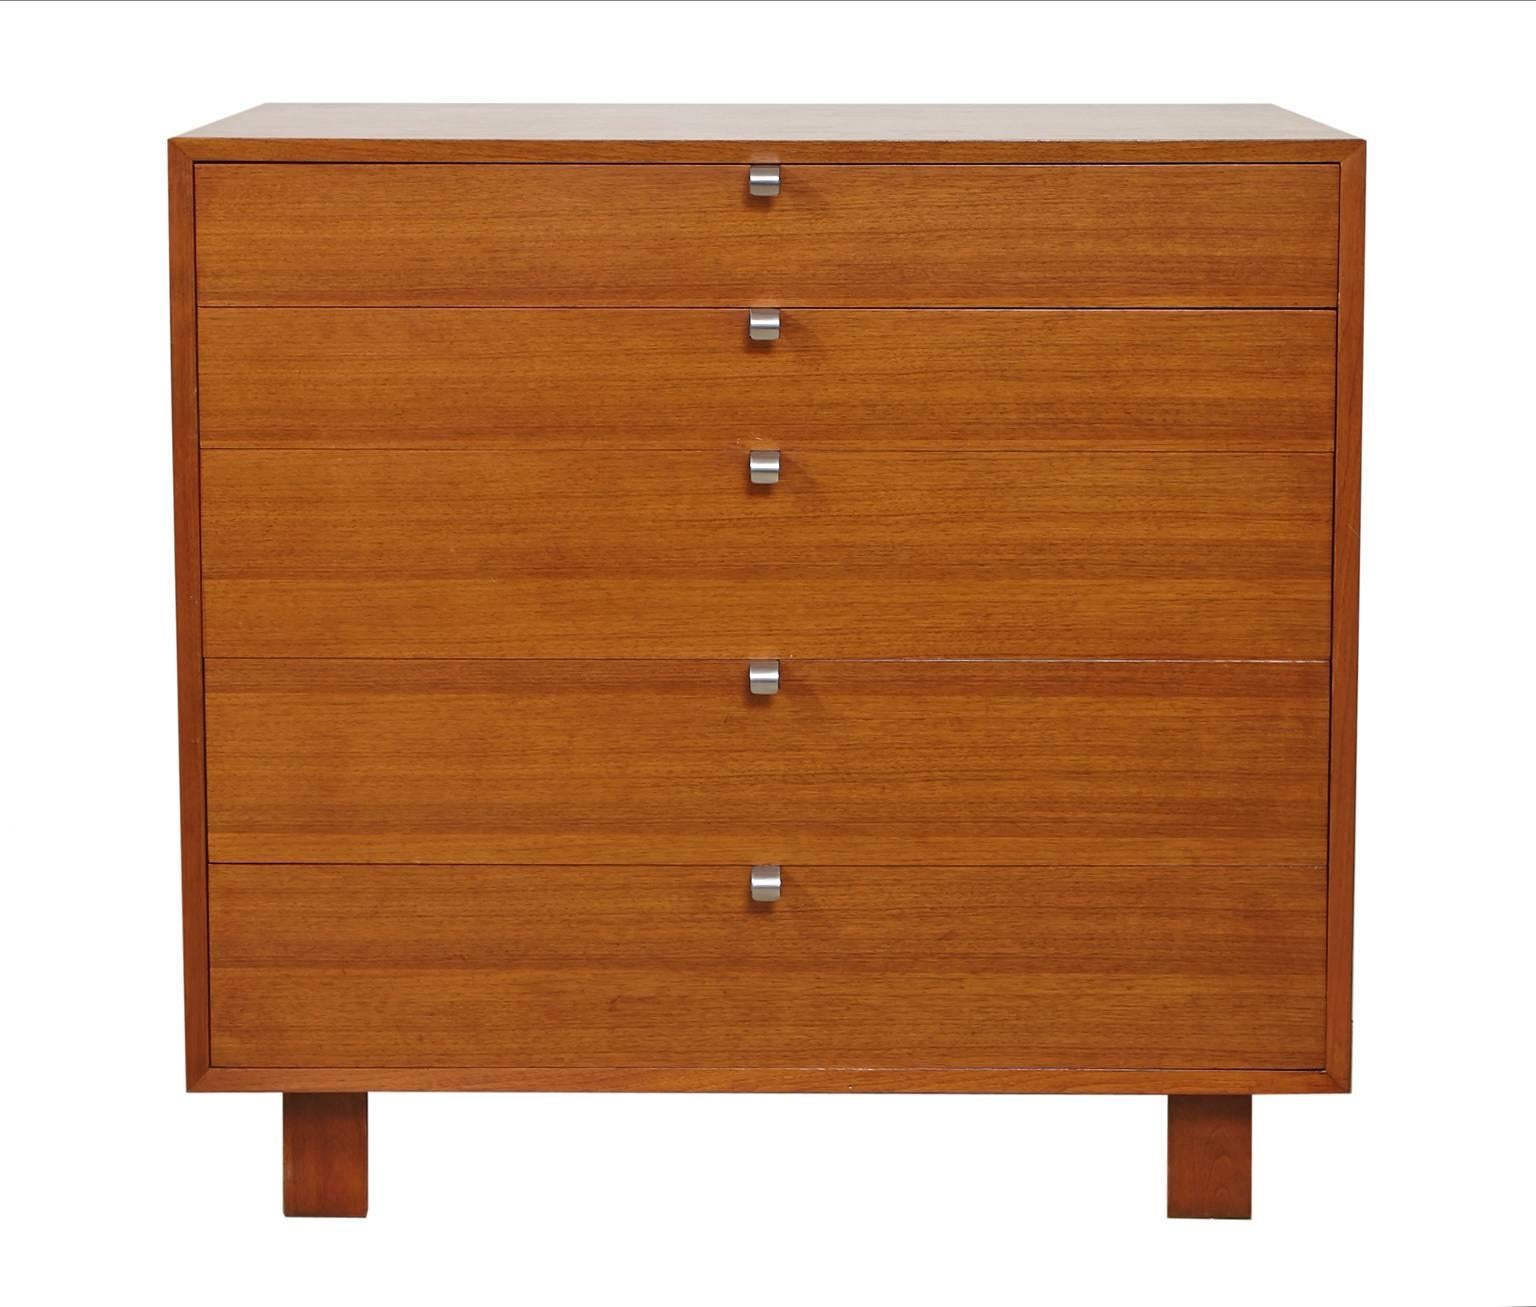 George Nelson for Herman Miller five-drawer, chest of drawers in walnut with original metal pulls. The upper drawer has dividers with the foil label bearing the George Nelson-Herman Miller name. Lower drawer also has dividers.
    
    
   